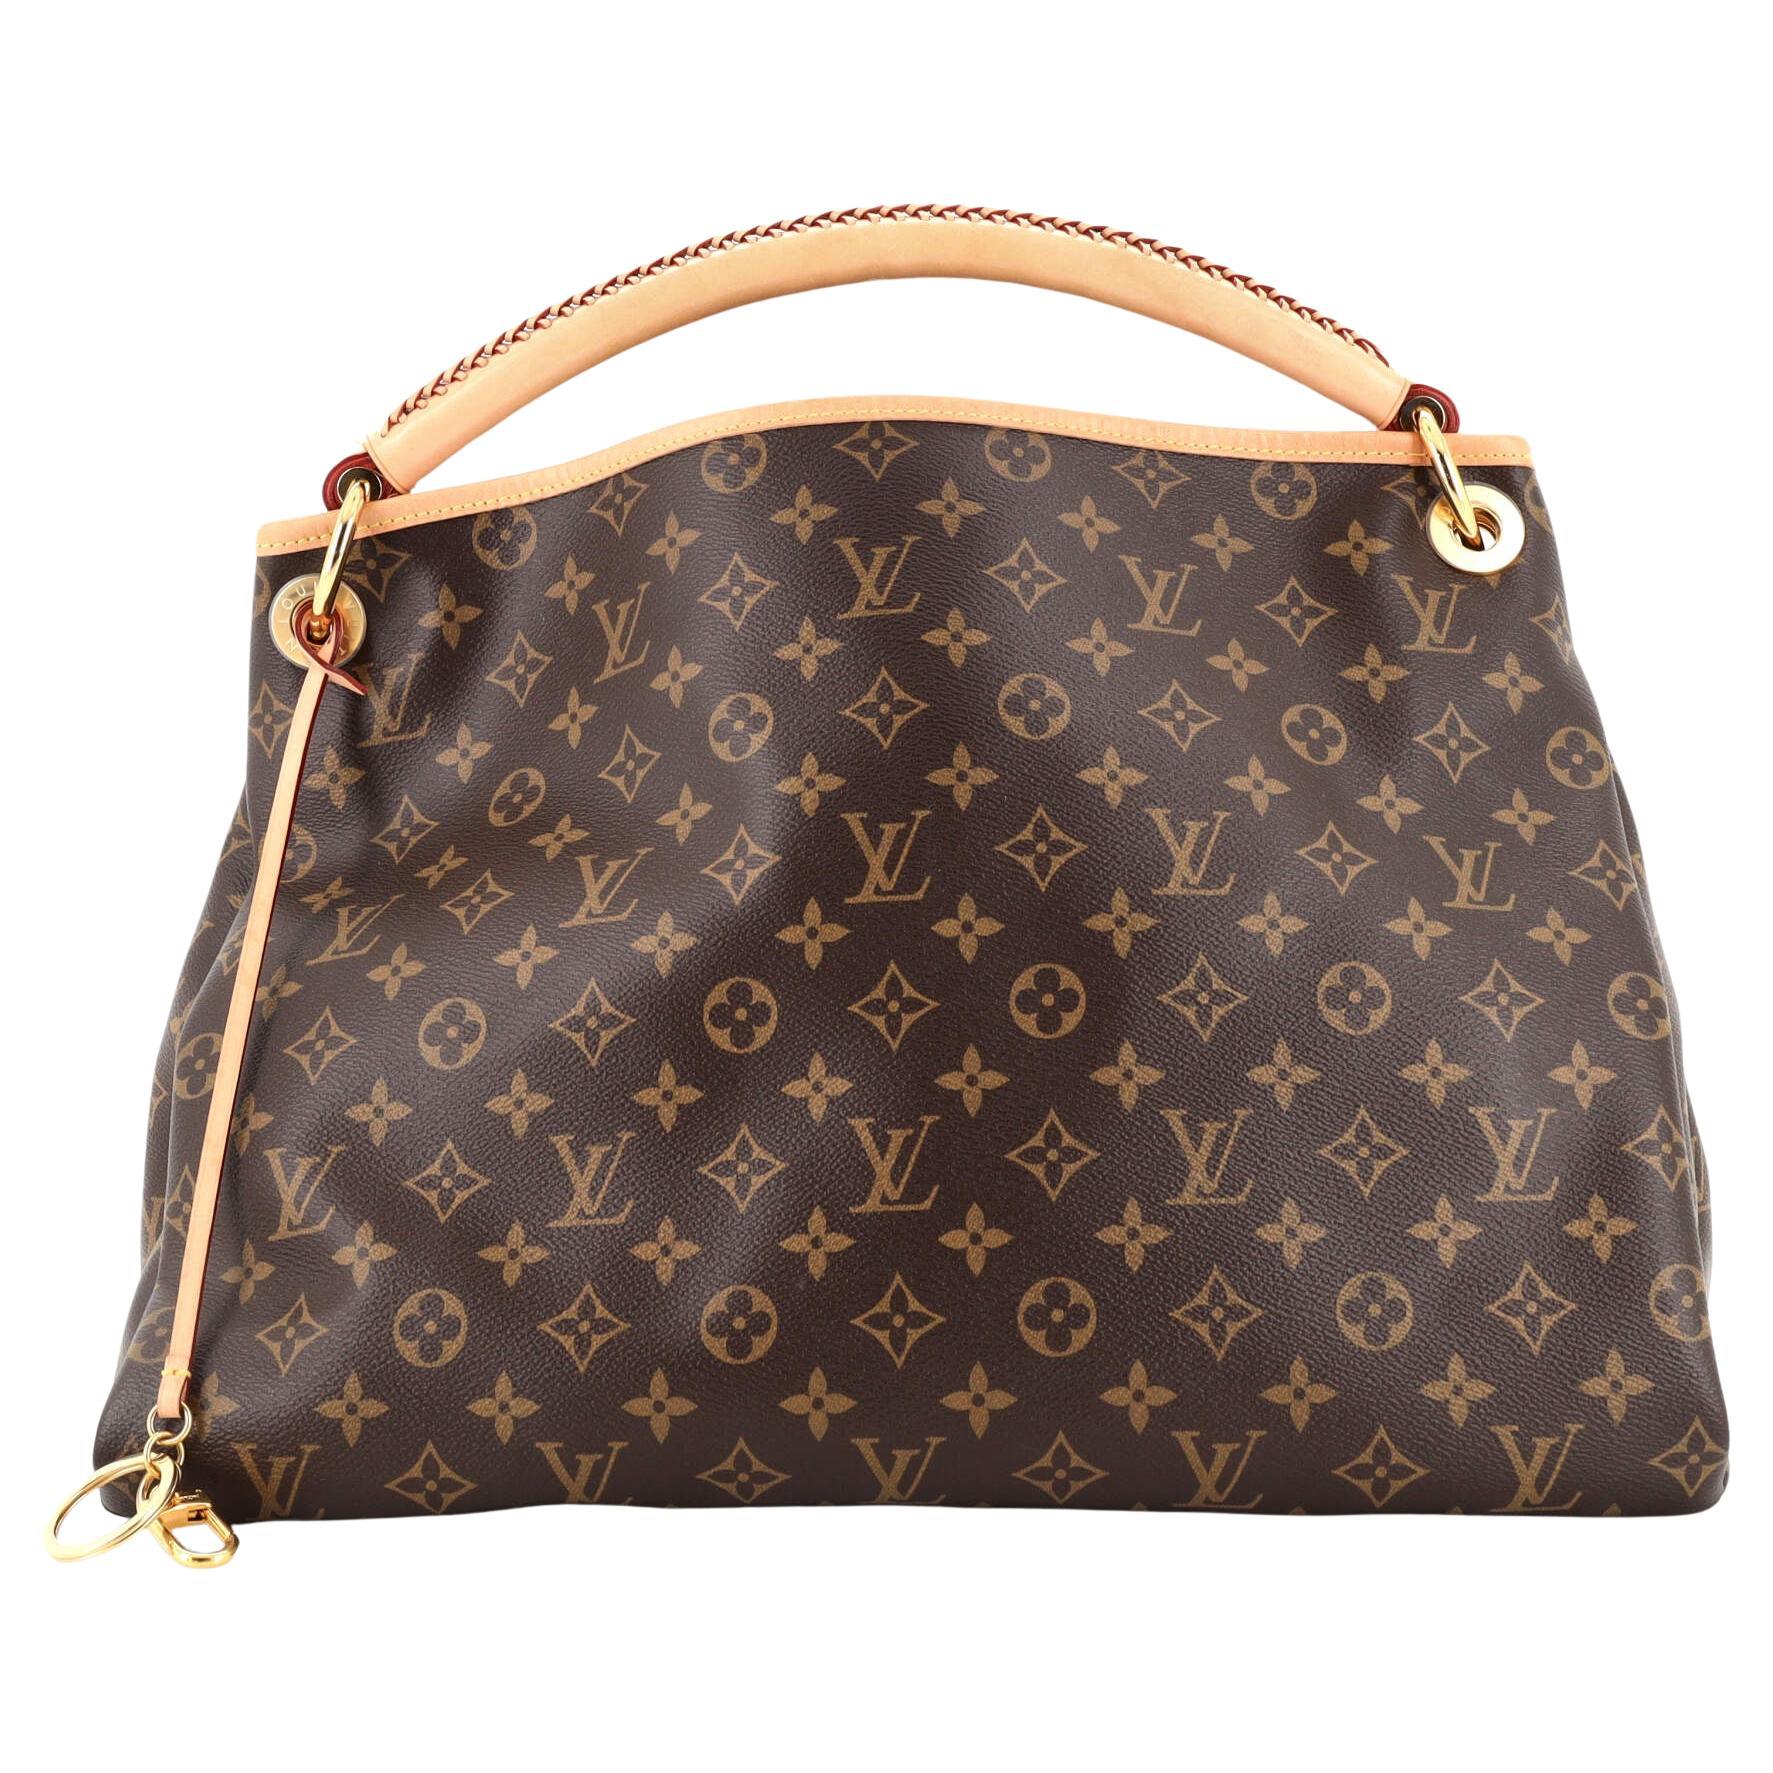 how can i tell if a louis vuitton is real